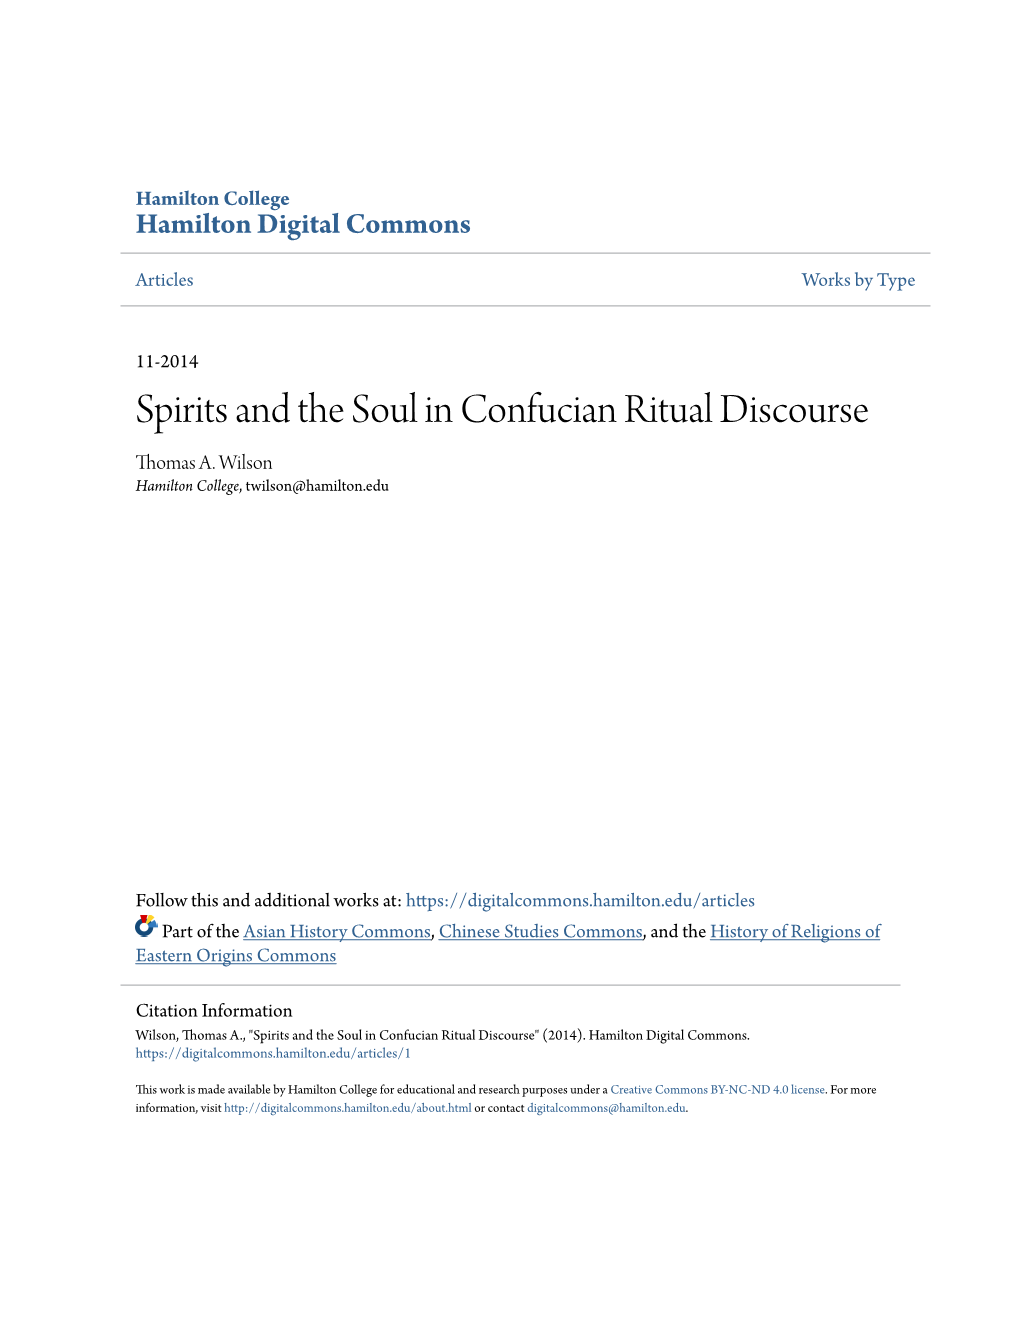 Spirits and the Soul in Confucian Ritual Discourse Thomas A